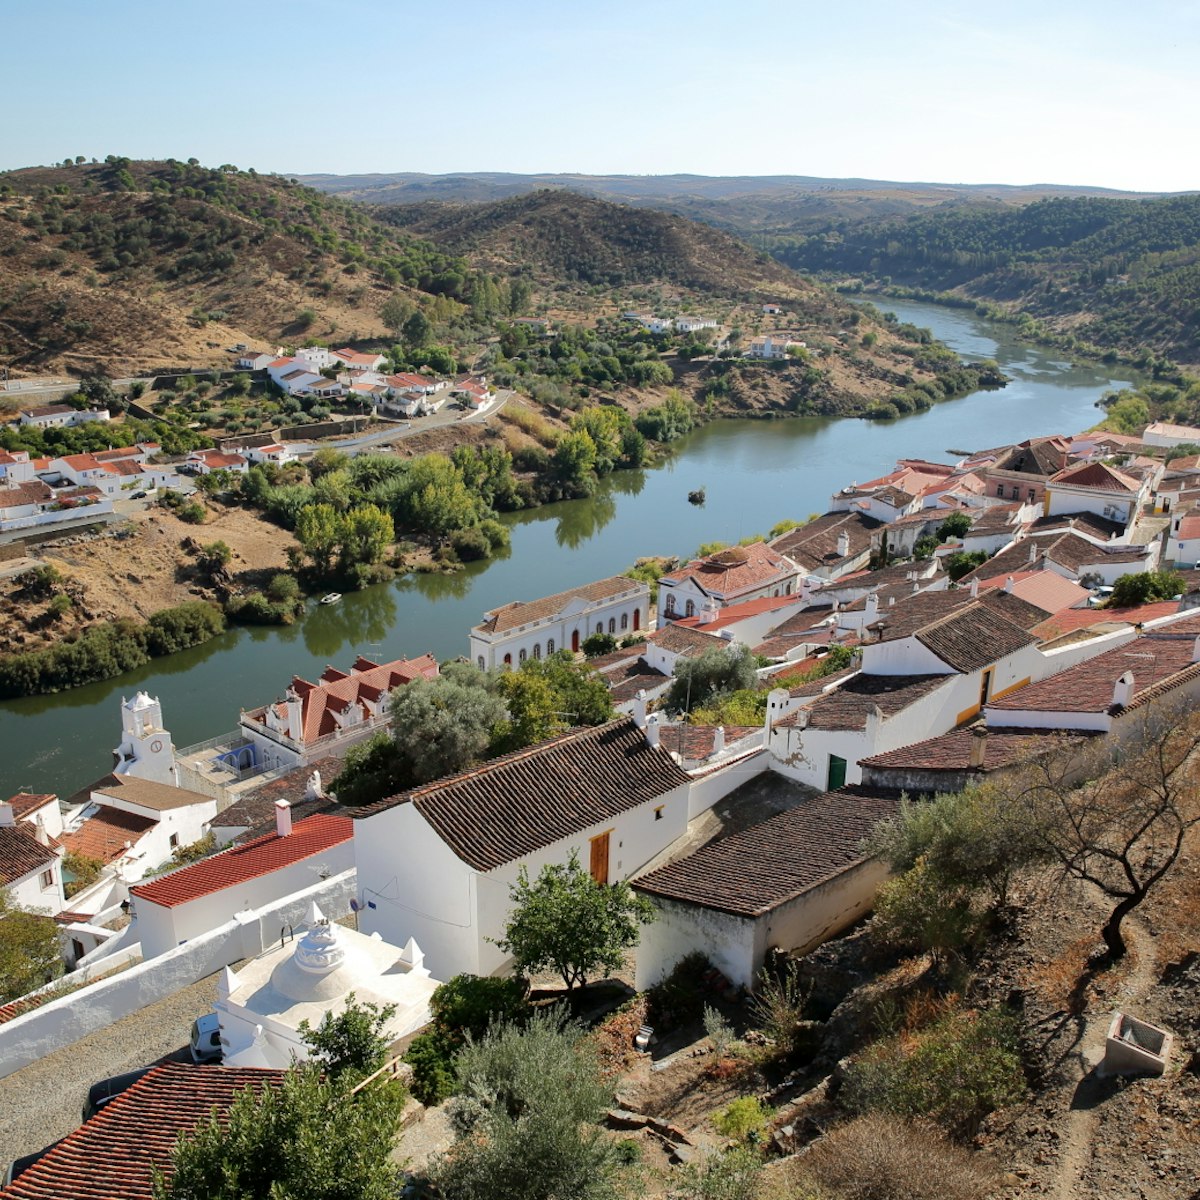 MERTOLA, PORTUGAL: General view of the fortified village and the surrounding hills from the castle; Shutterstock ID 511409617; Your name (First / Last): Tom Stainer; GL account no.: 65050 ; Netsuite department name: Online Editorial ; Full Product or Project name including edition: Best in Europe 2017